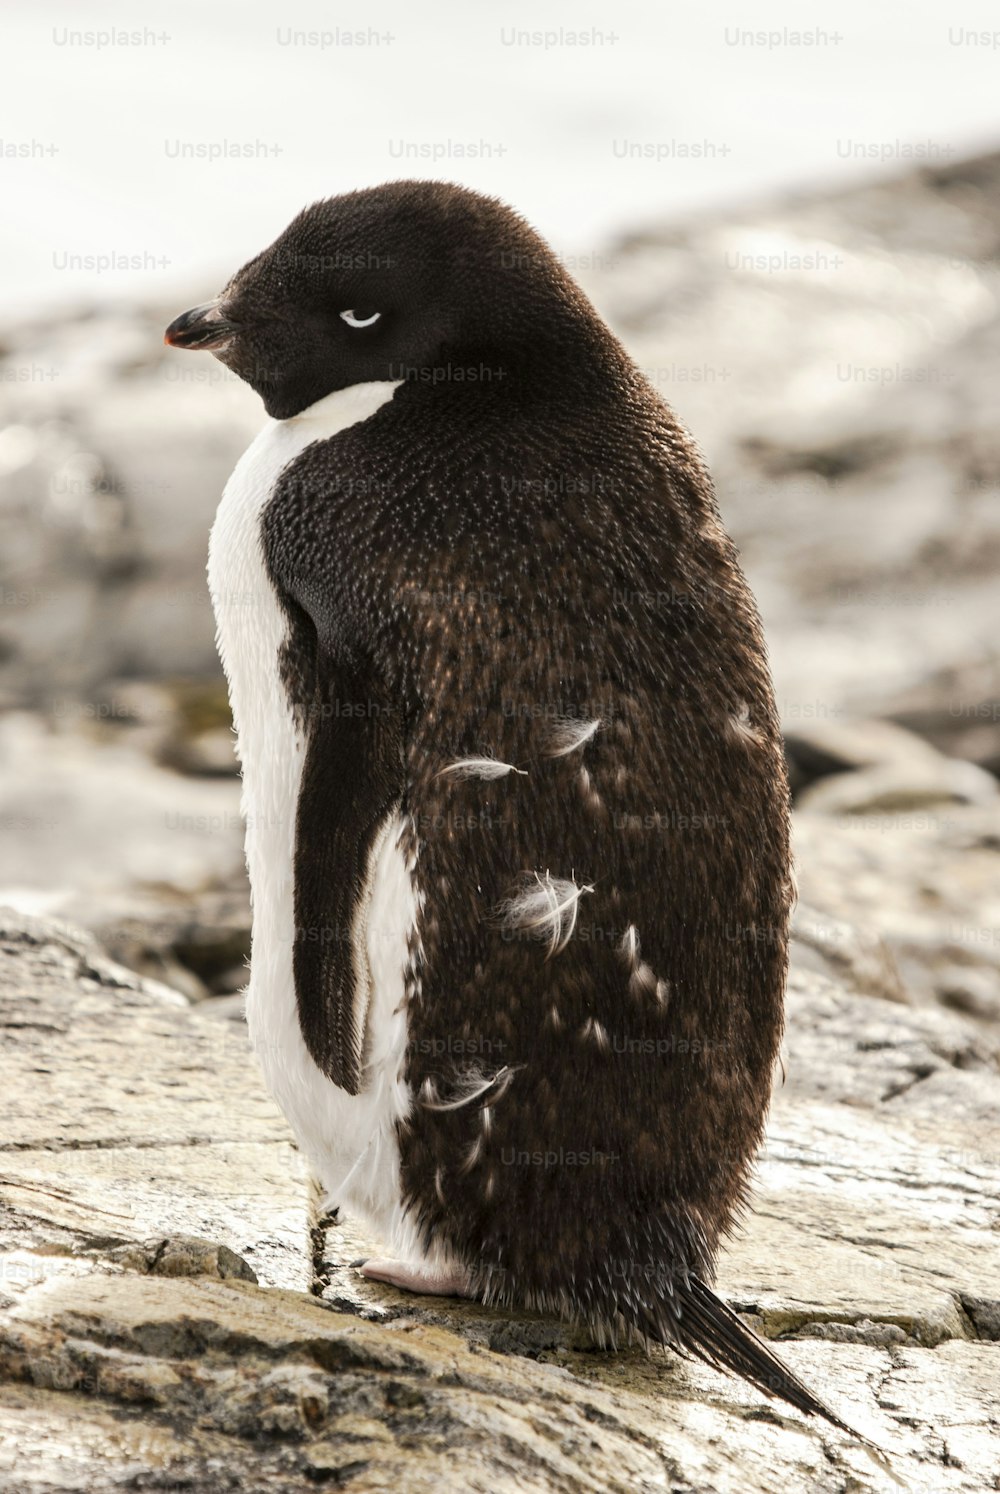 A young Penguin in Antarctica